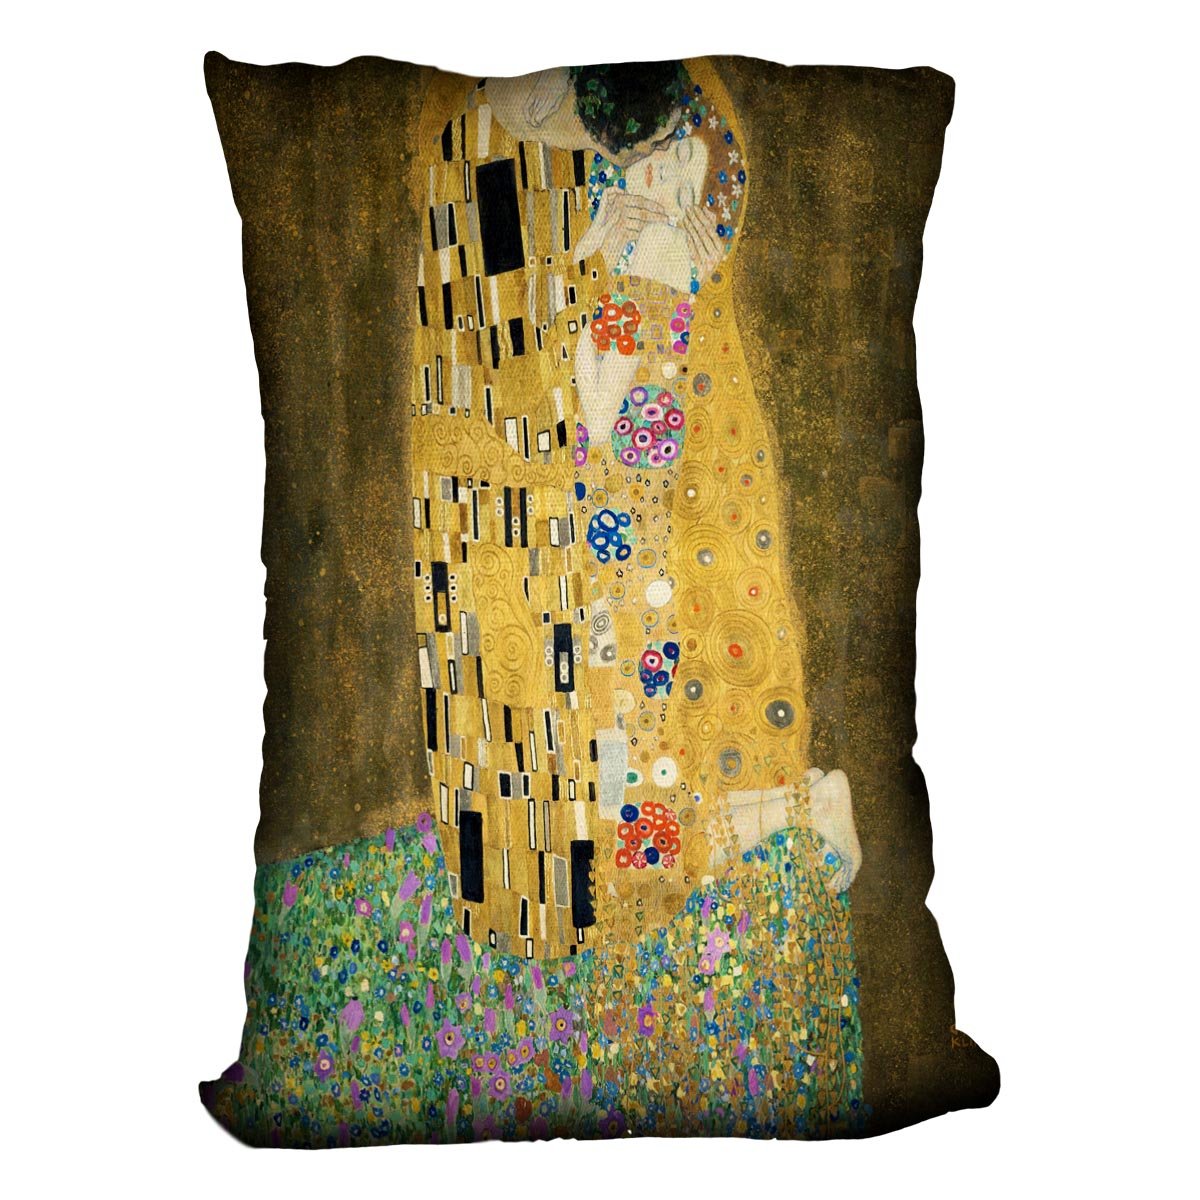 The Kiss by Klimt 2 Throw Pillow